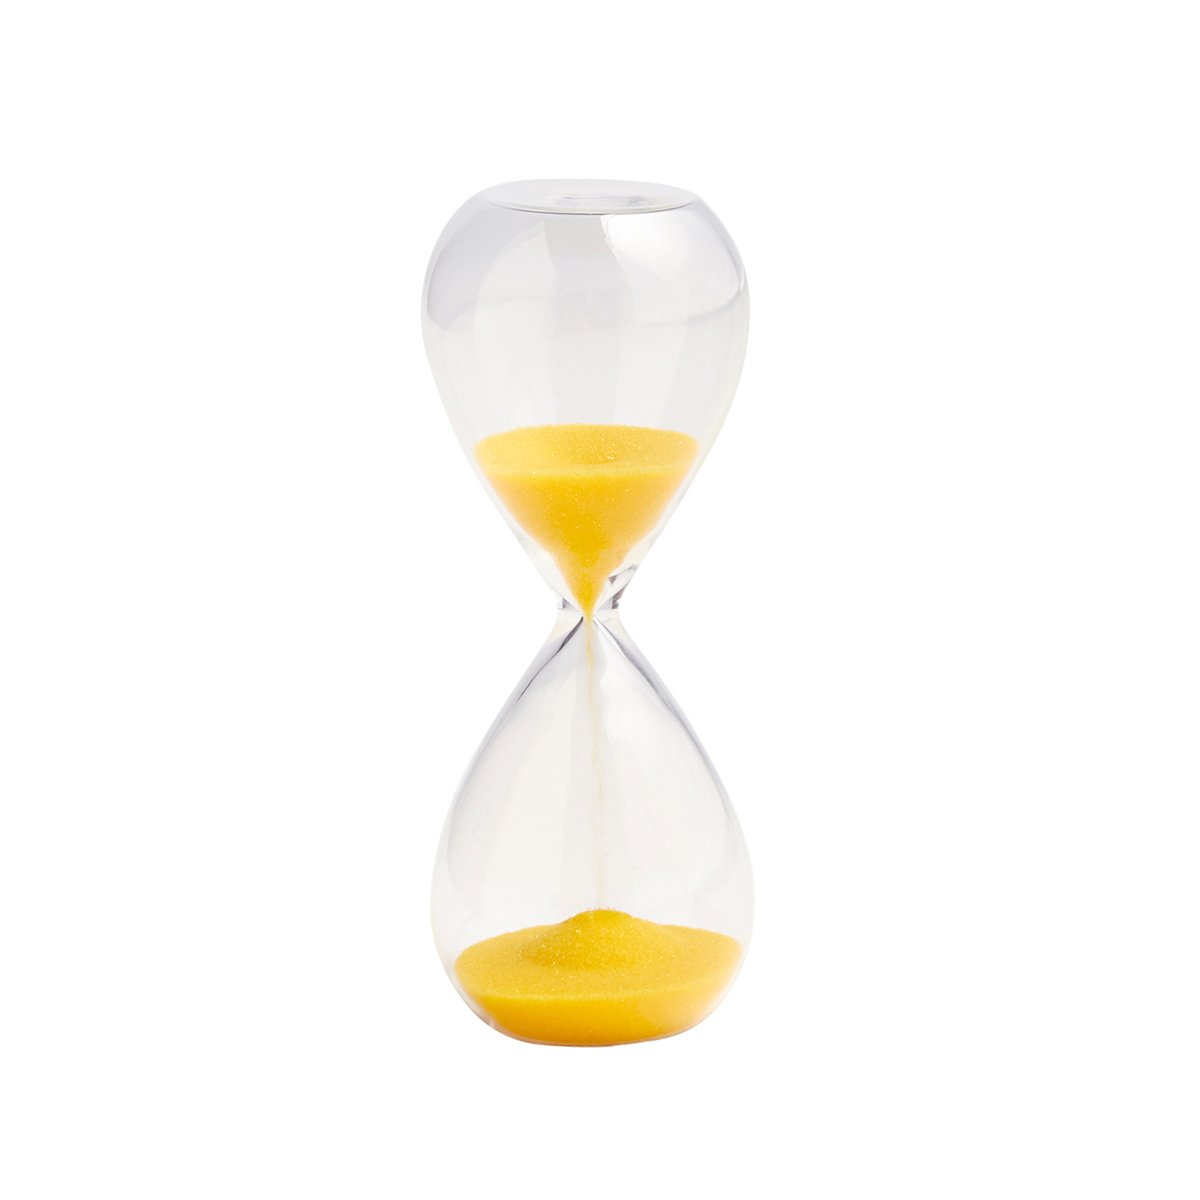 more about hay time hourglass - 15 minutes - pink. hay time hourglass - 15 ...